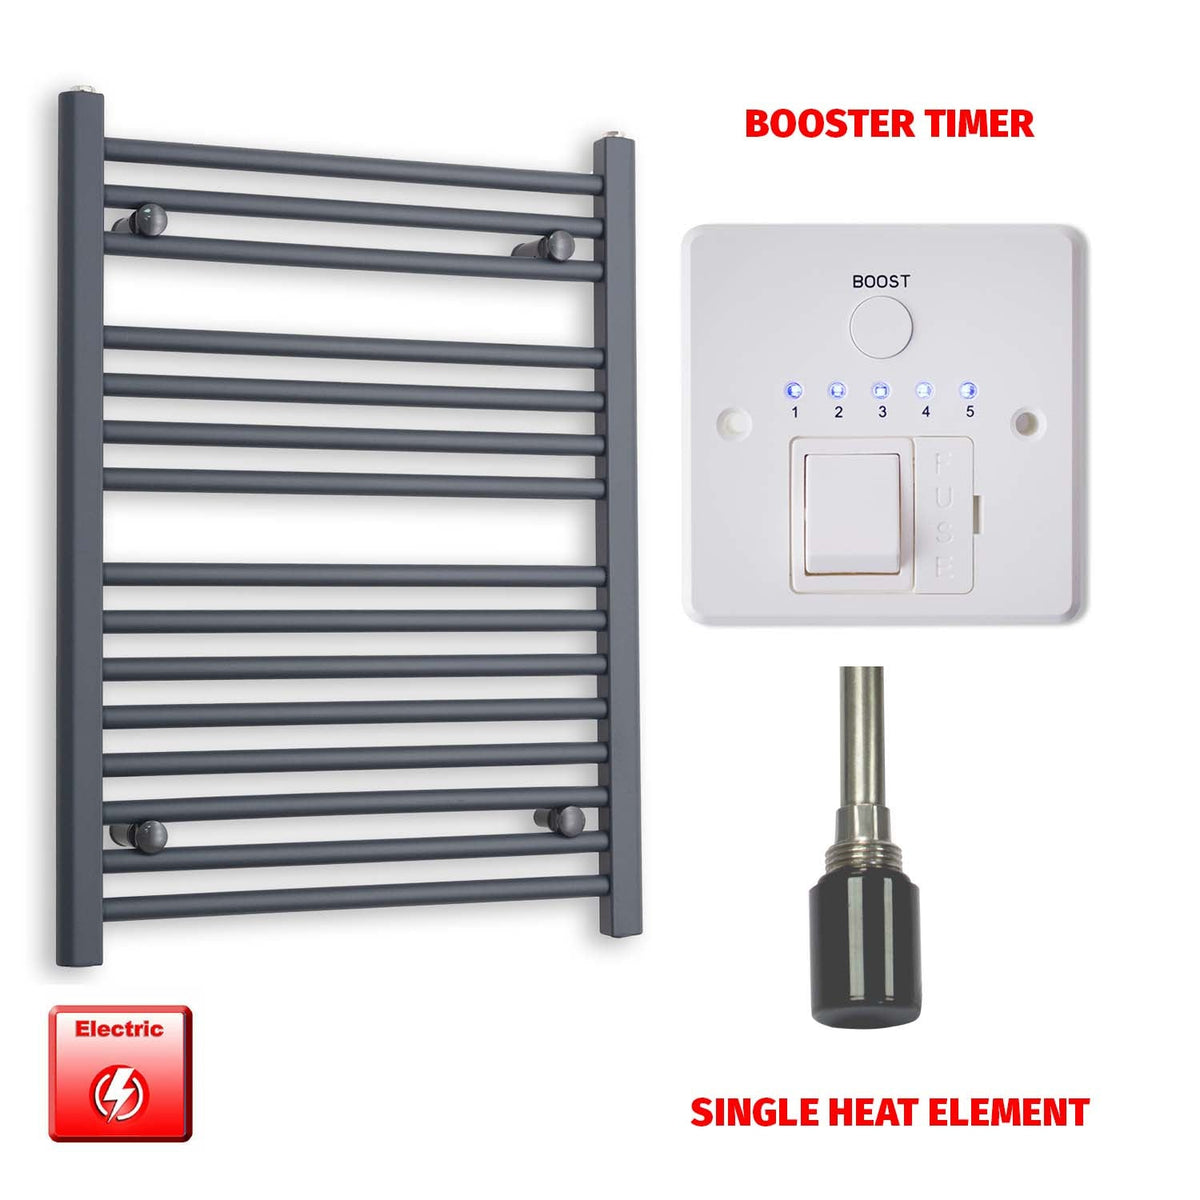 800mm High 600mm Wide Flat Anthracite Pre-Filled Electric Heated Towel Rail Radiator HTR Single heat element Booster timer